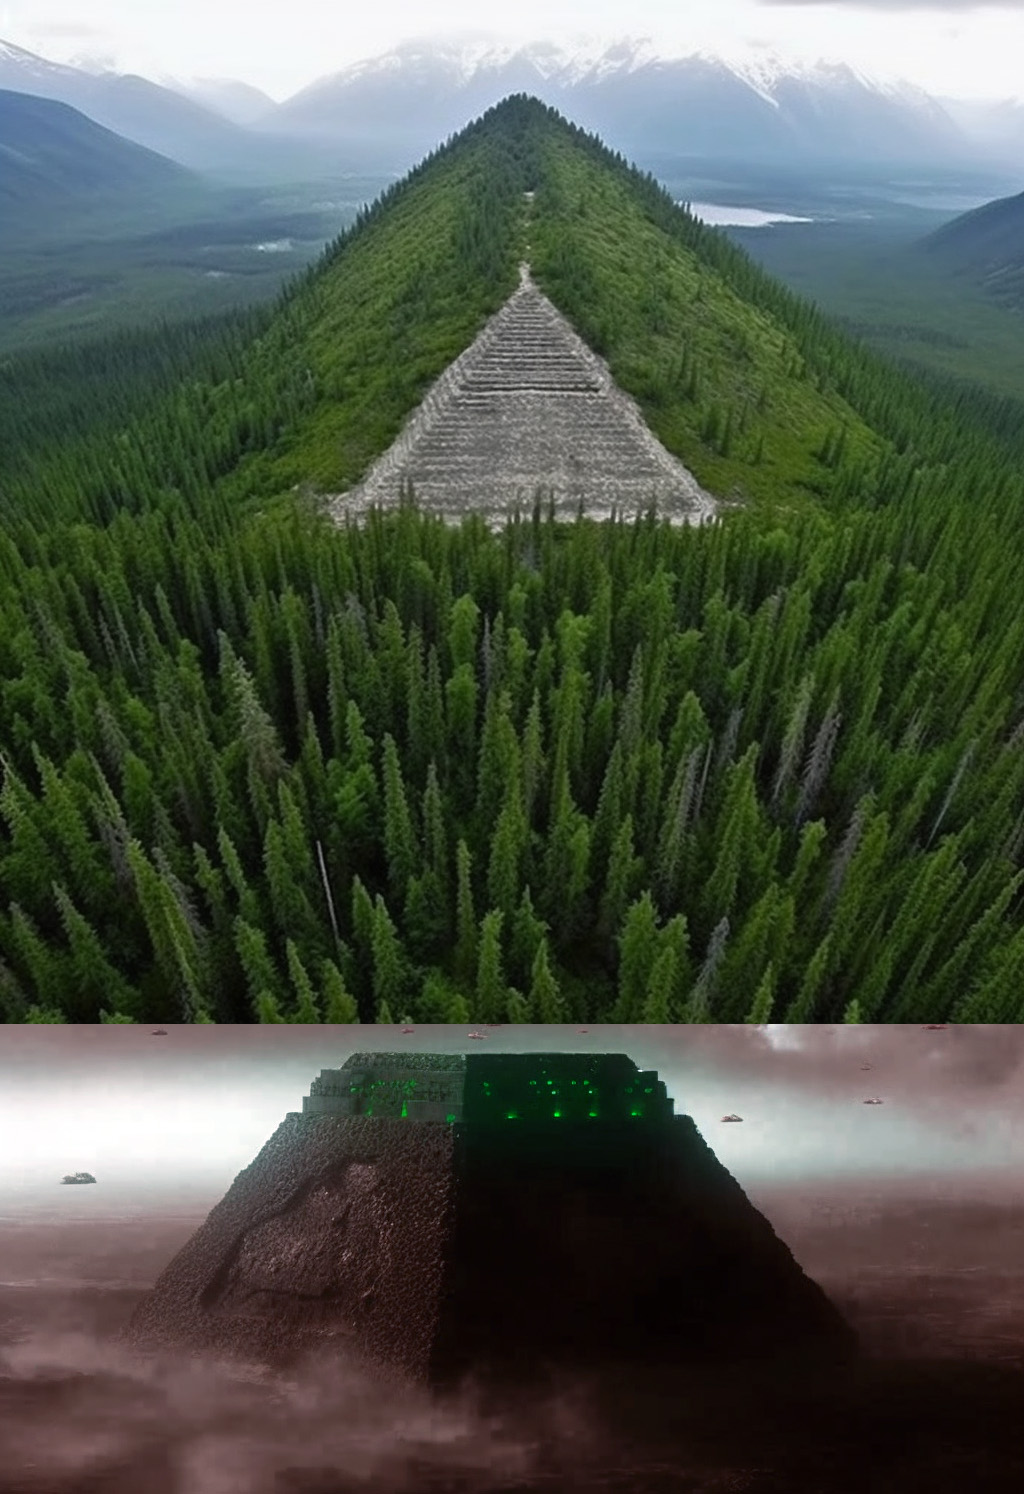 Mount-Hayes- Mount Denali-dark pyramid-base - Project Stargate UAP - The subconscious human brain, in essence, can be conceived as nothing more than a mere receiver in the universe.
Sync the basal ganglia 🧠 to amplify and receive better quality data from universal source core of information sent from unified external transmitters.